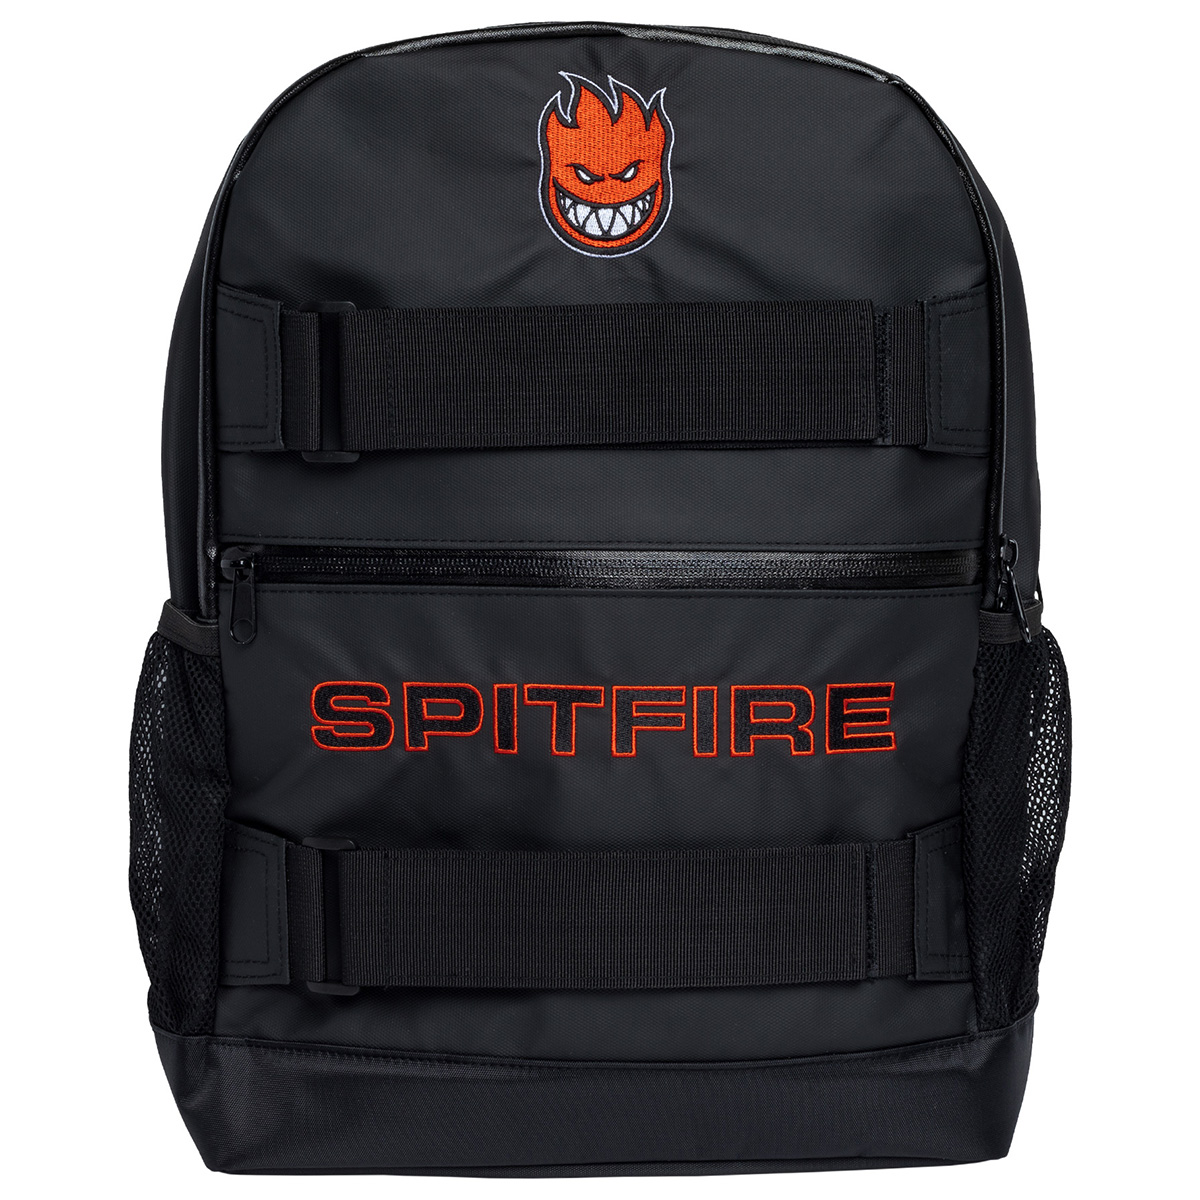 Spitfire Classic '87 Backpack Black/Red